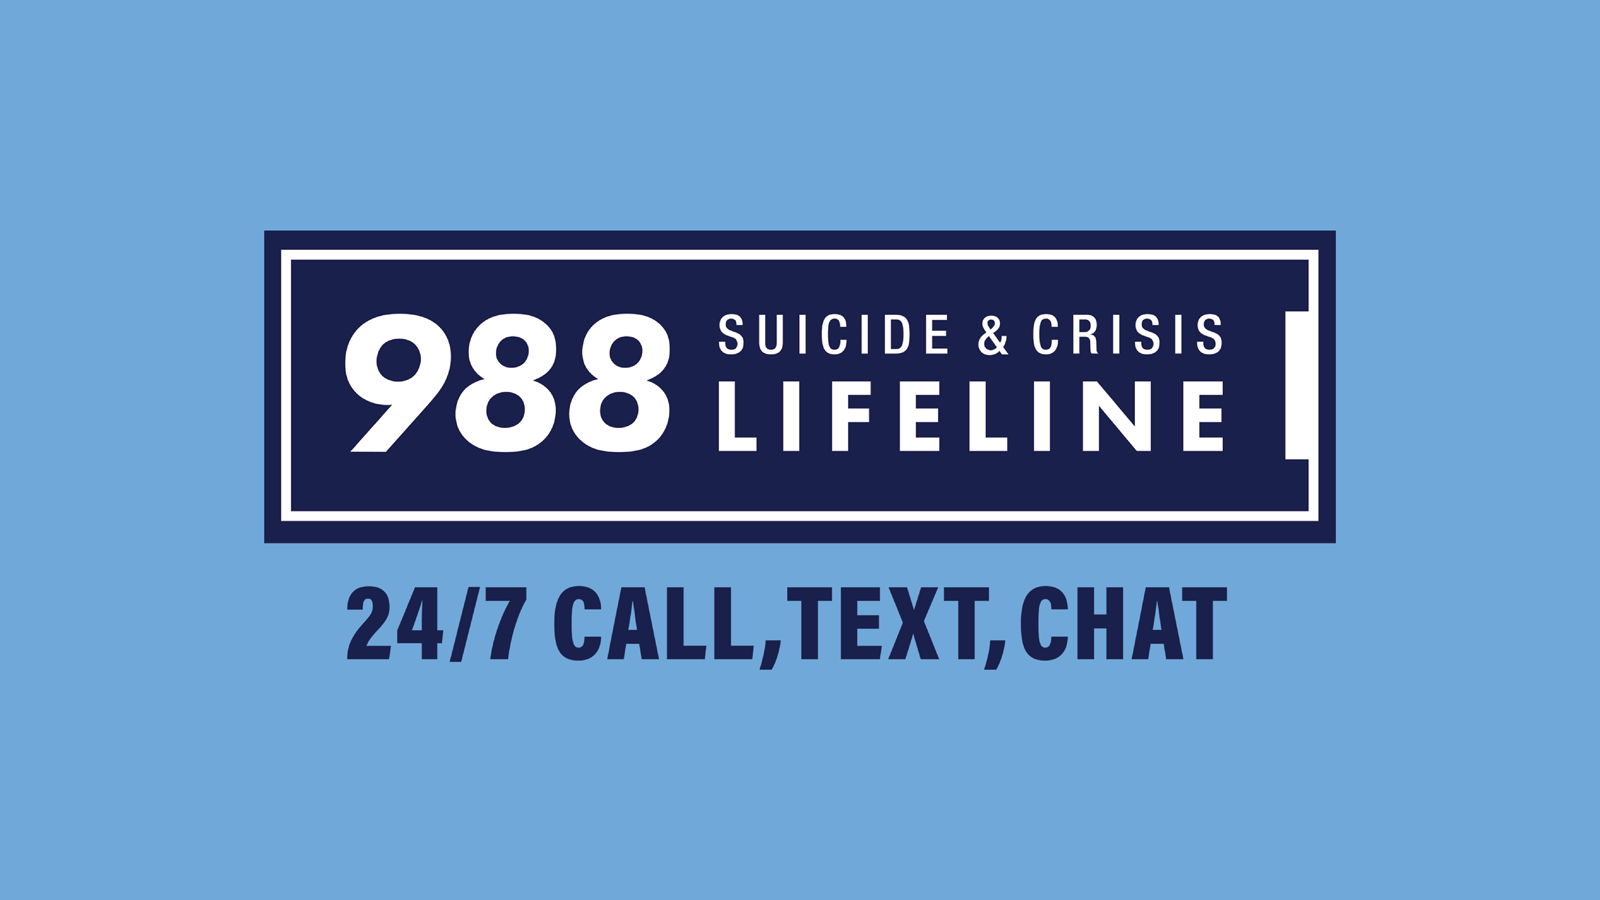 988 Suicide and crisis lifeline is in white font inside a navy blue rectangle with a white outline surrounded by a navy blue outline. 24/ call, text, chat is in navy blue font under the rectangular box. The background is a sky blue rectangle.